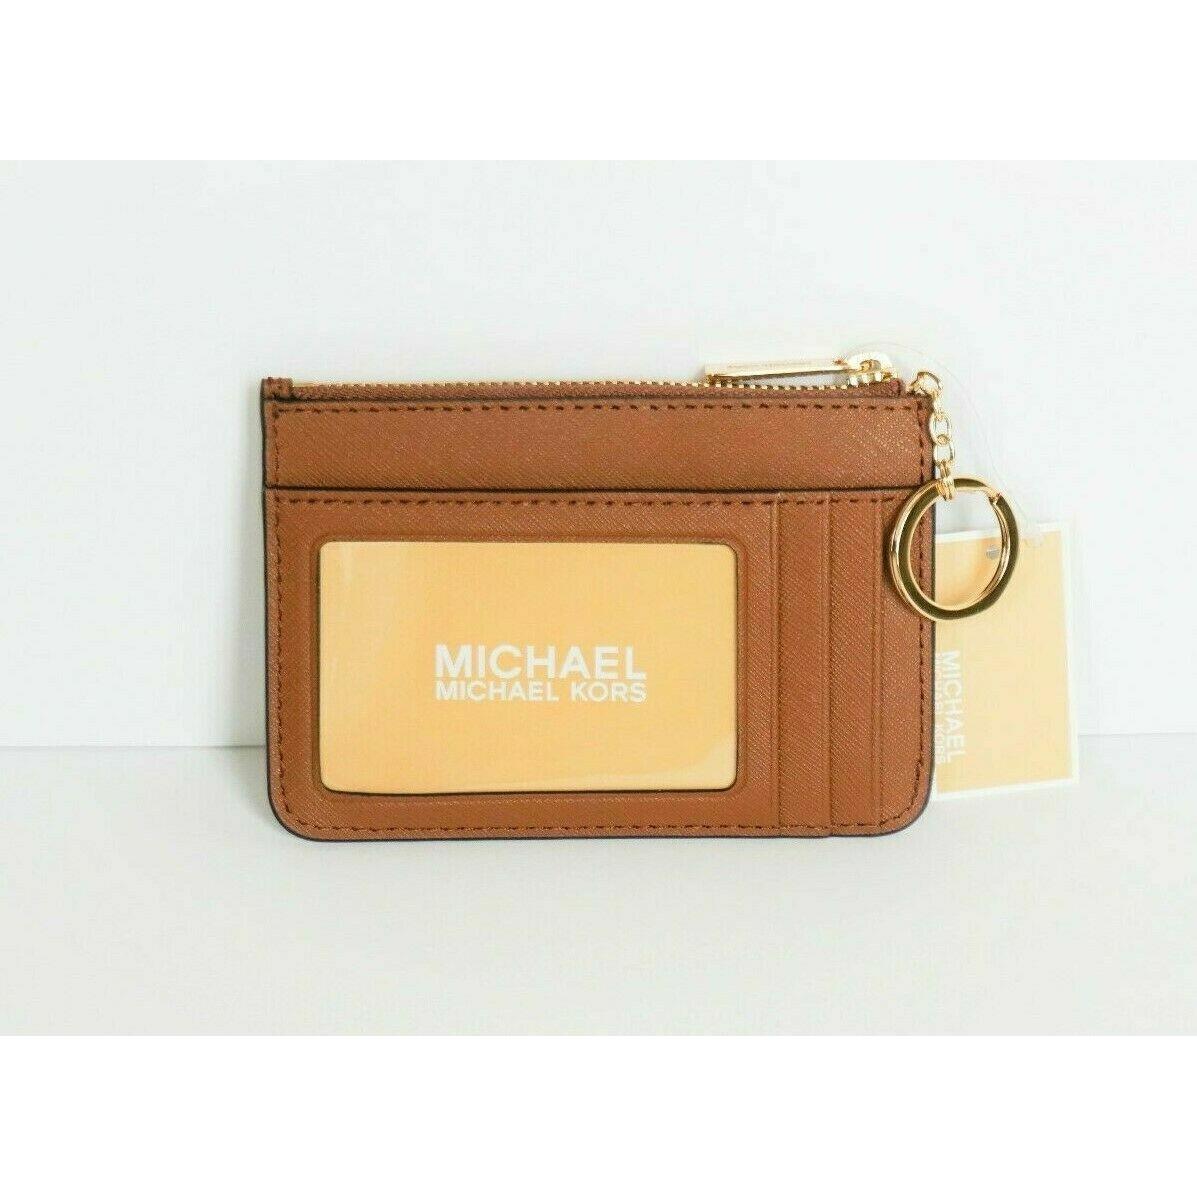 MICHAEL KORS JET SET TRAVEL SMALL TOP ZIP COIN POUCH WITH ID HOLDER SA   cadysdeluxecom